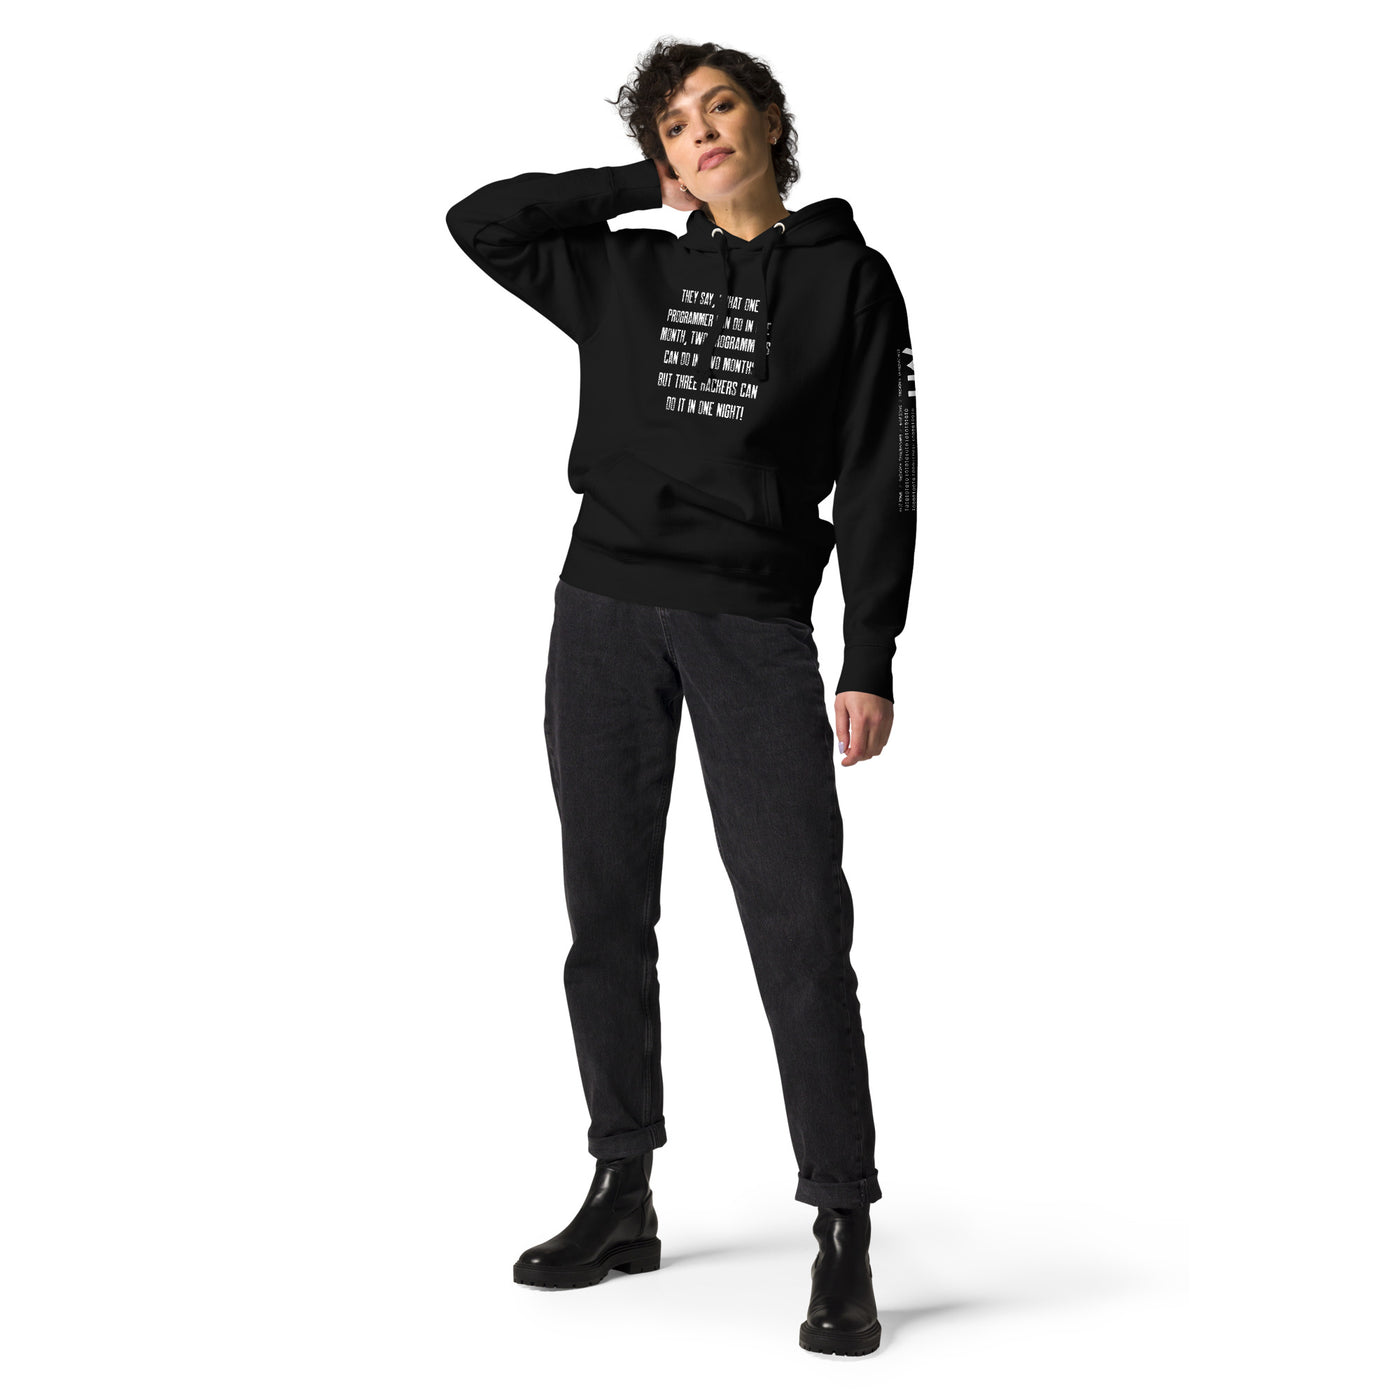 They say, what one programmer can do in one month V1 - Unisex Hoodie